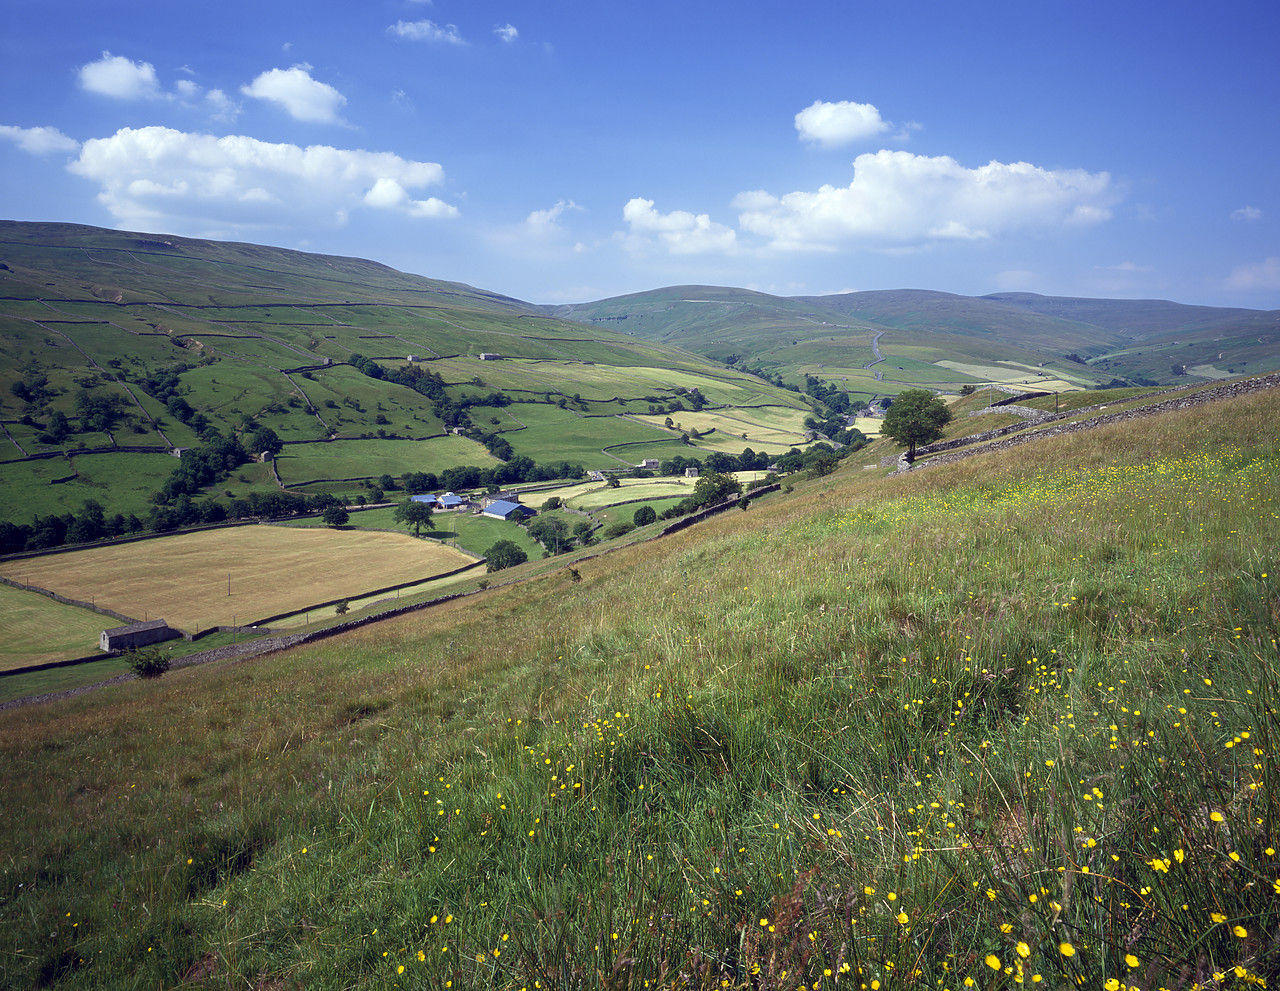 #944632-1 - View over Swaledale, near Muker, North Yorkshire, England